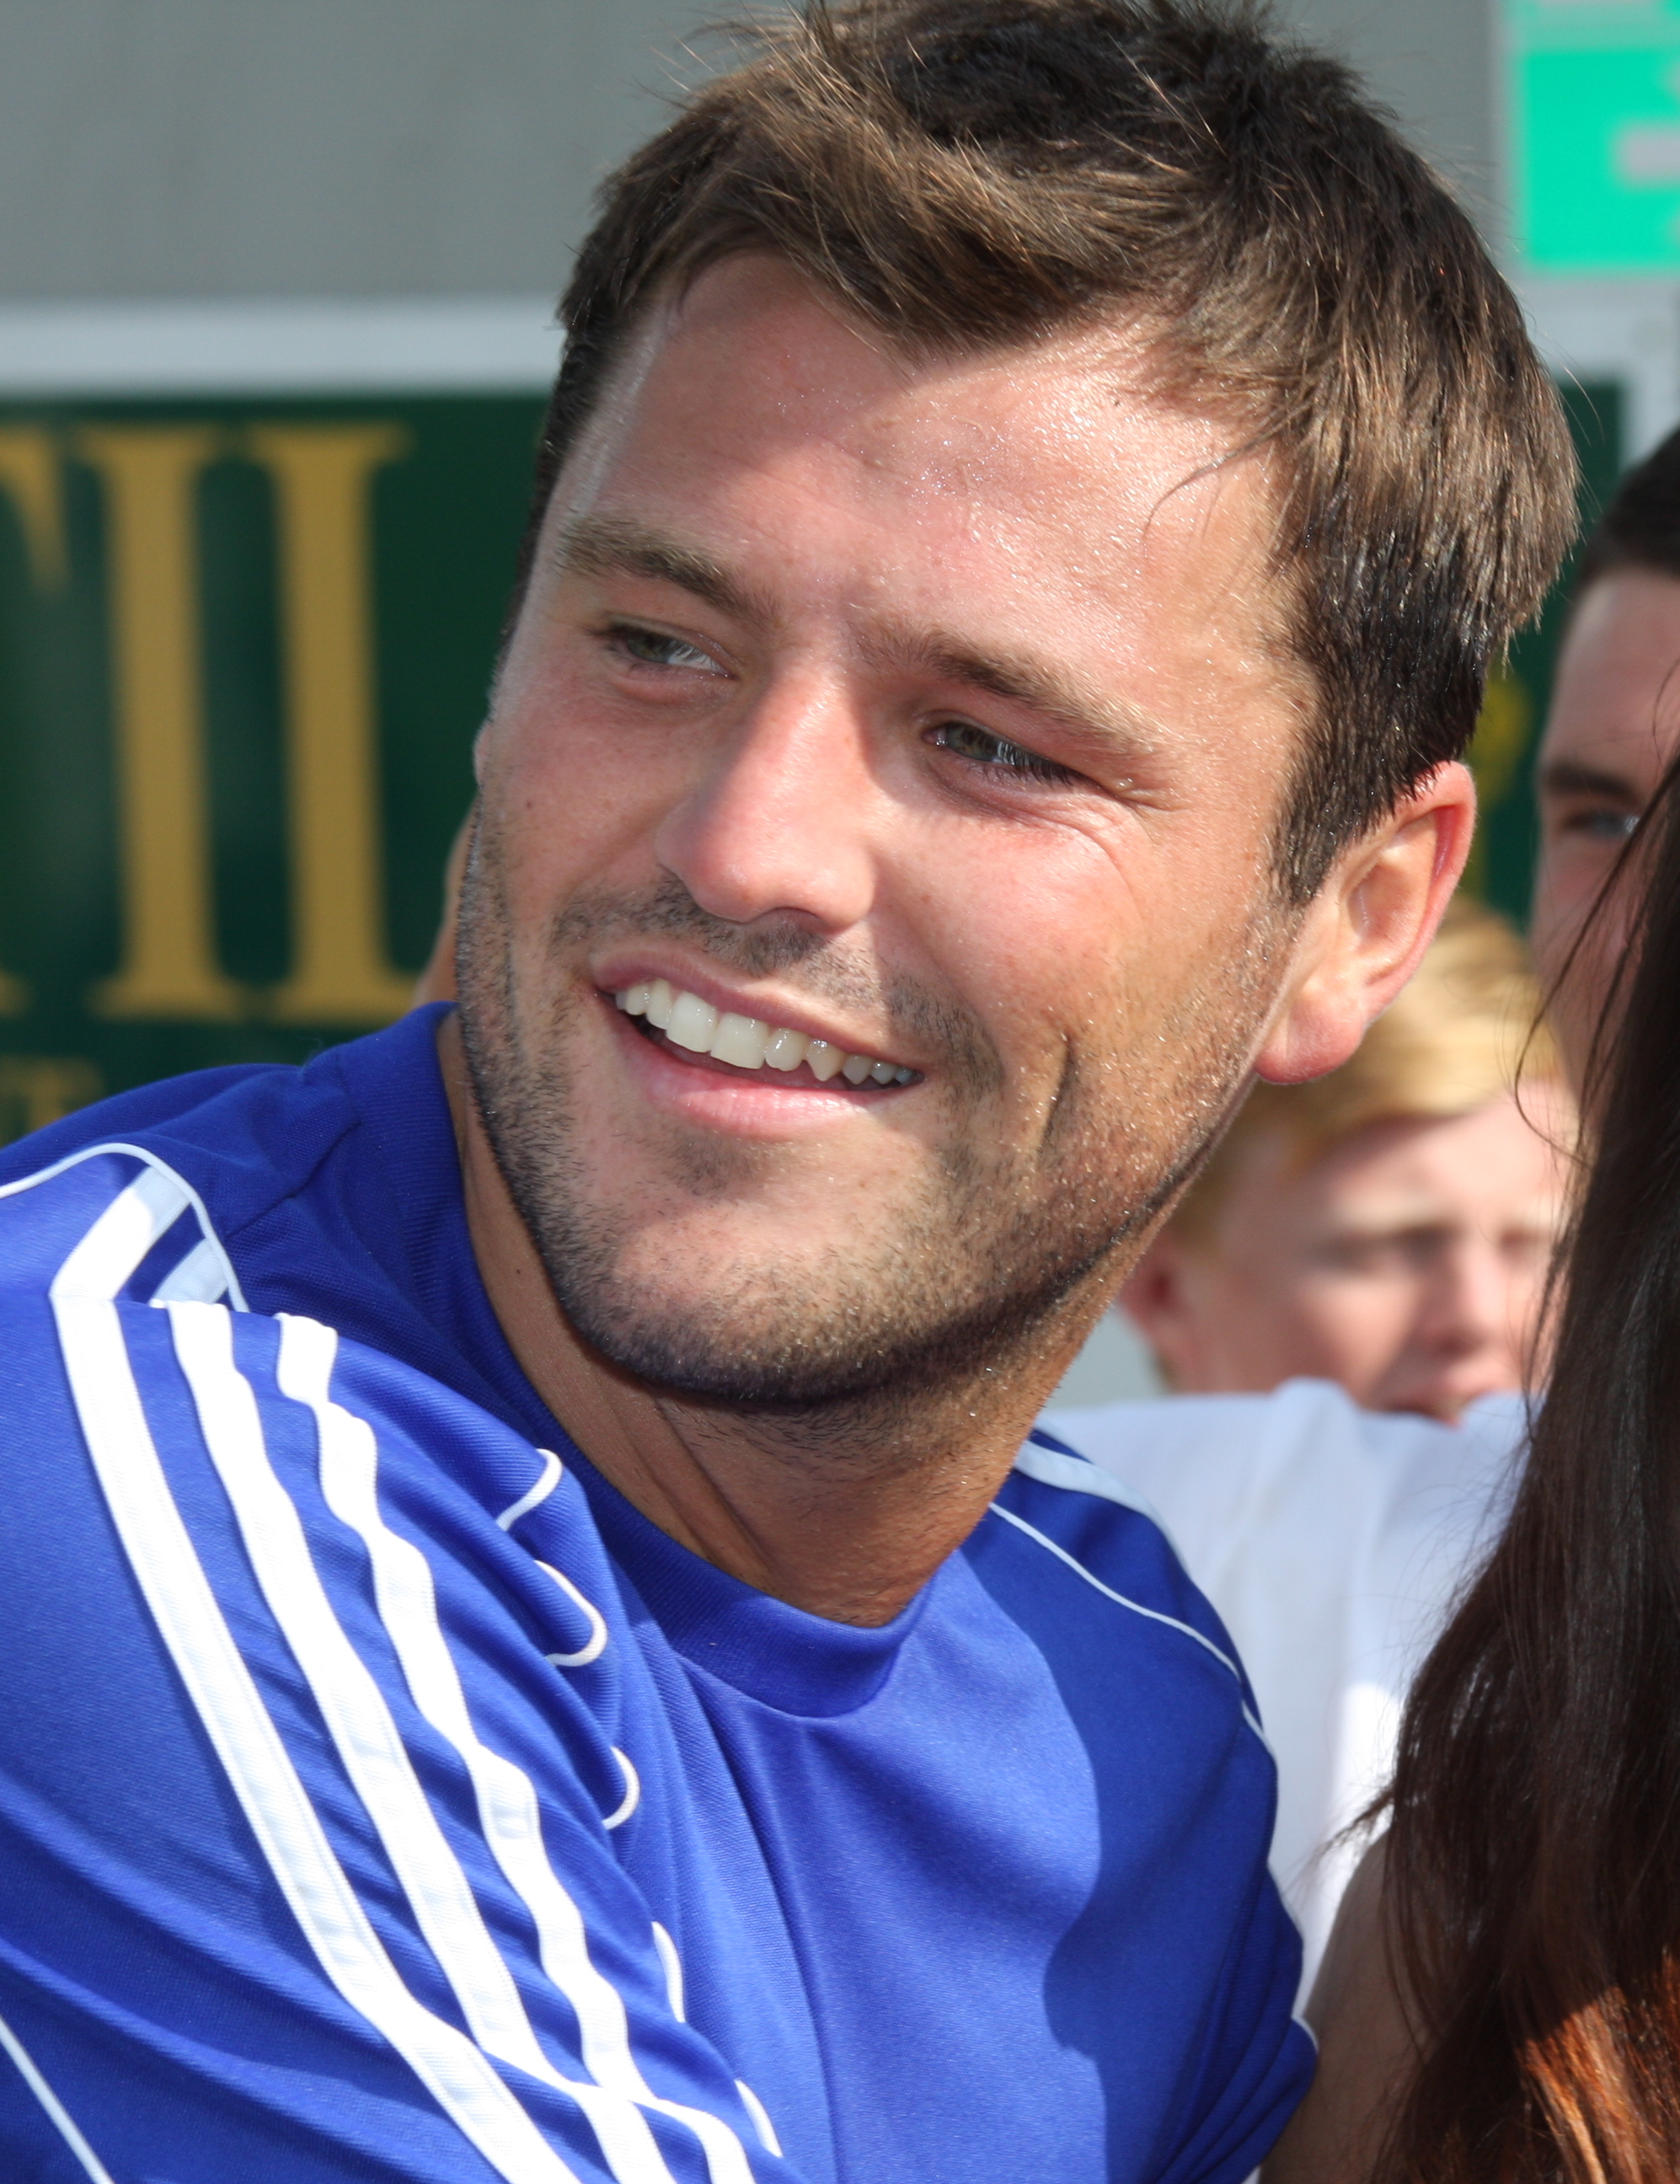 Mark Wright (TV personality) 2011 (cropped).jpg. 